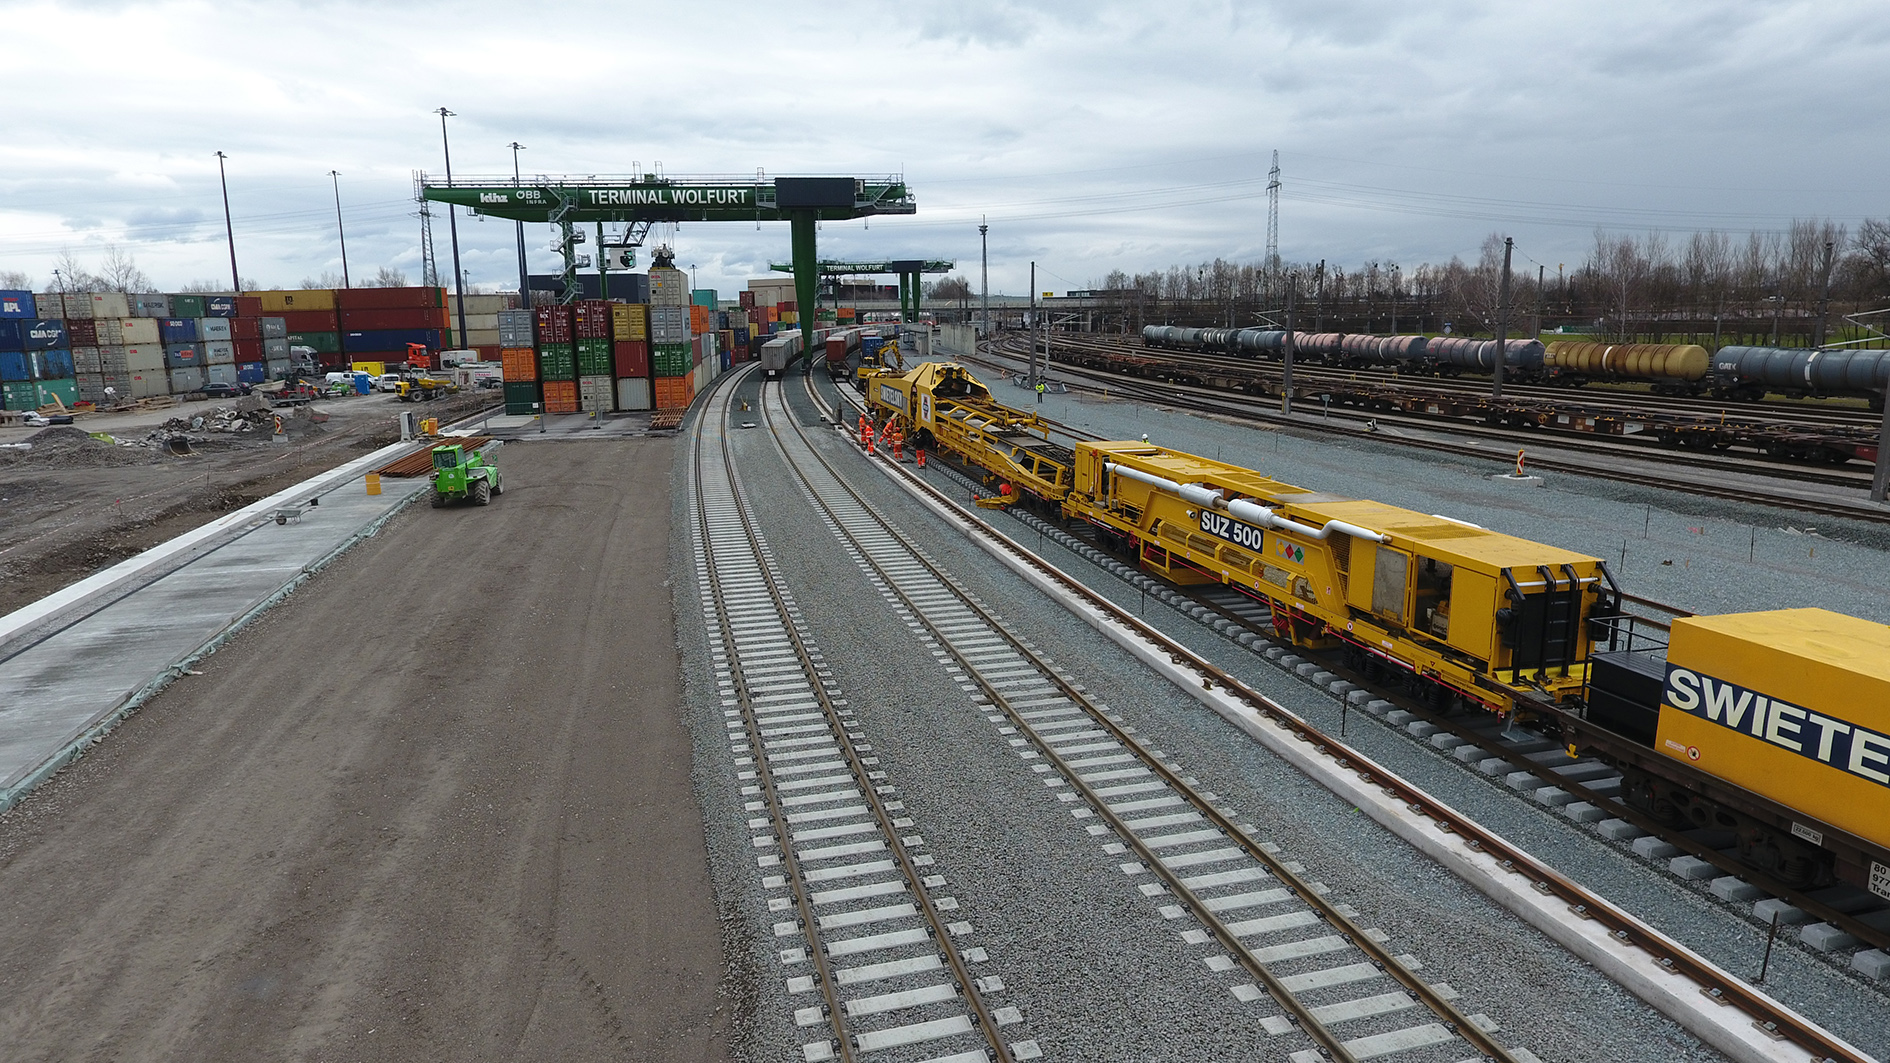 Last construction phase at the ÖBB freight center in Wolfurt